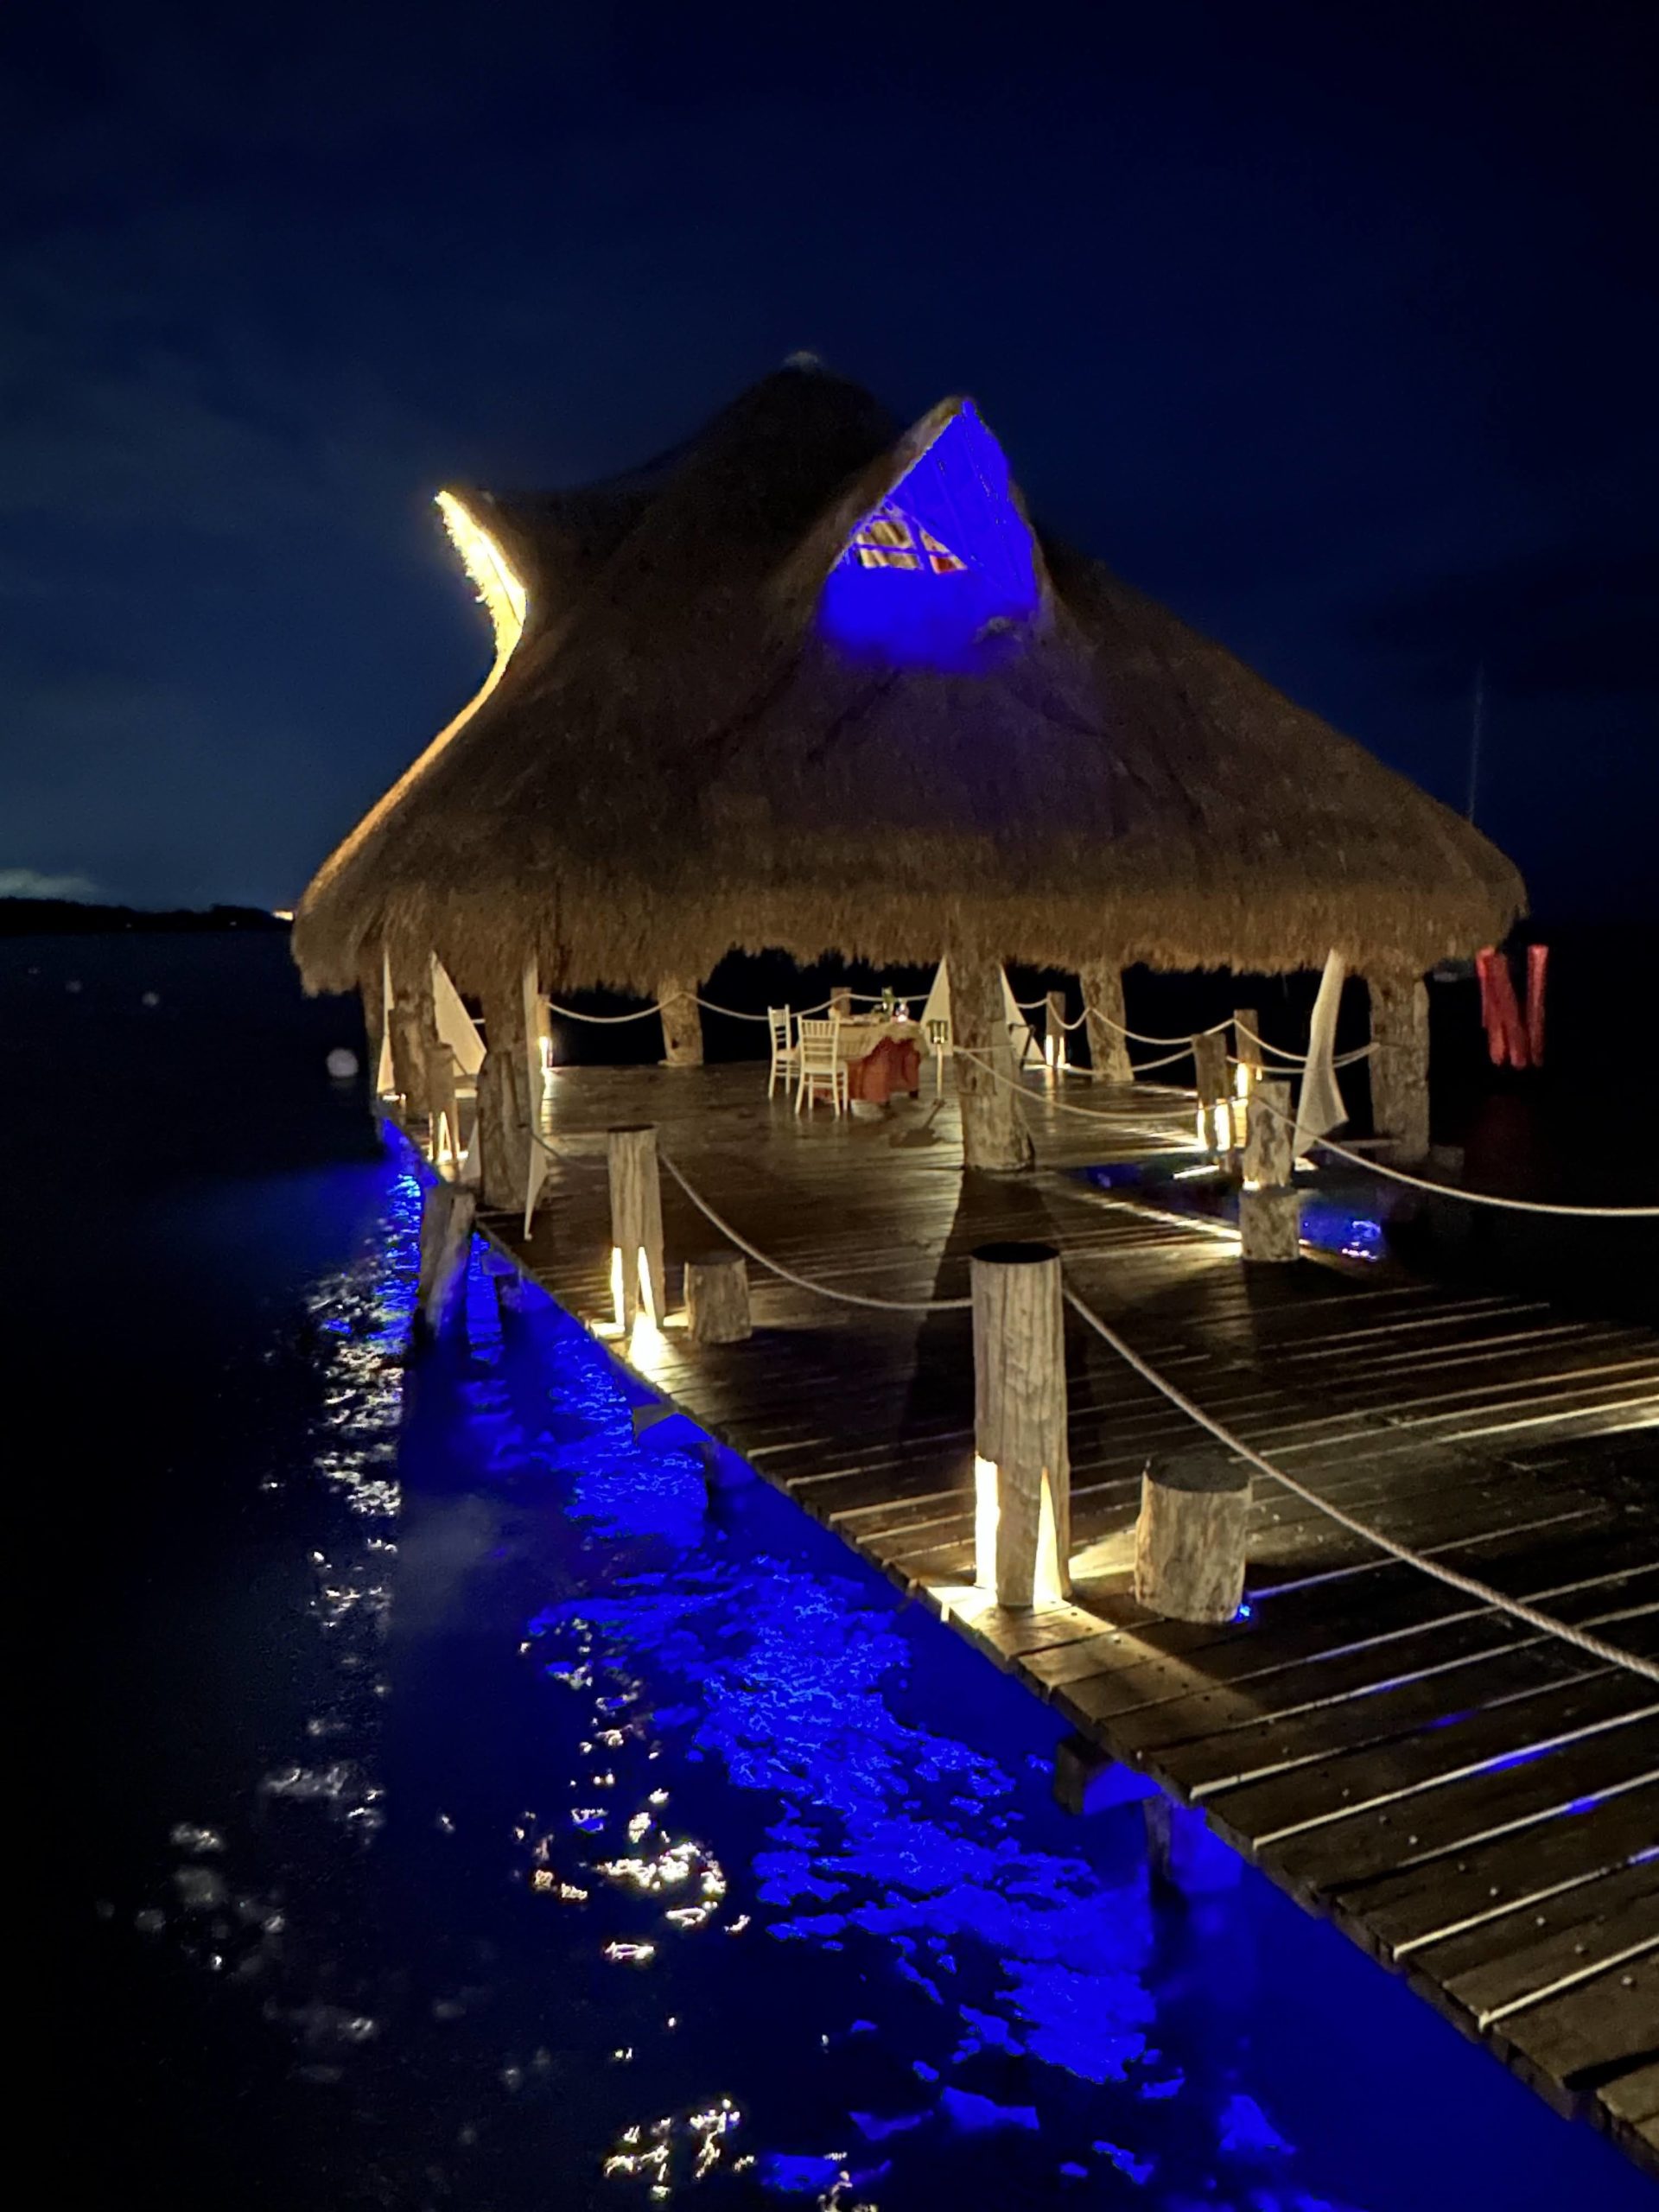 a thatched roof on a dock at night